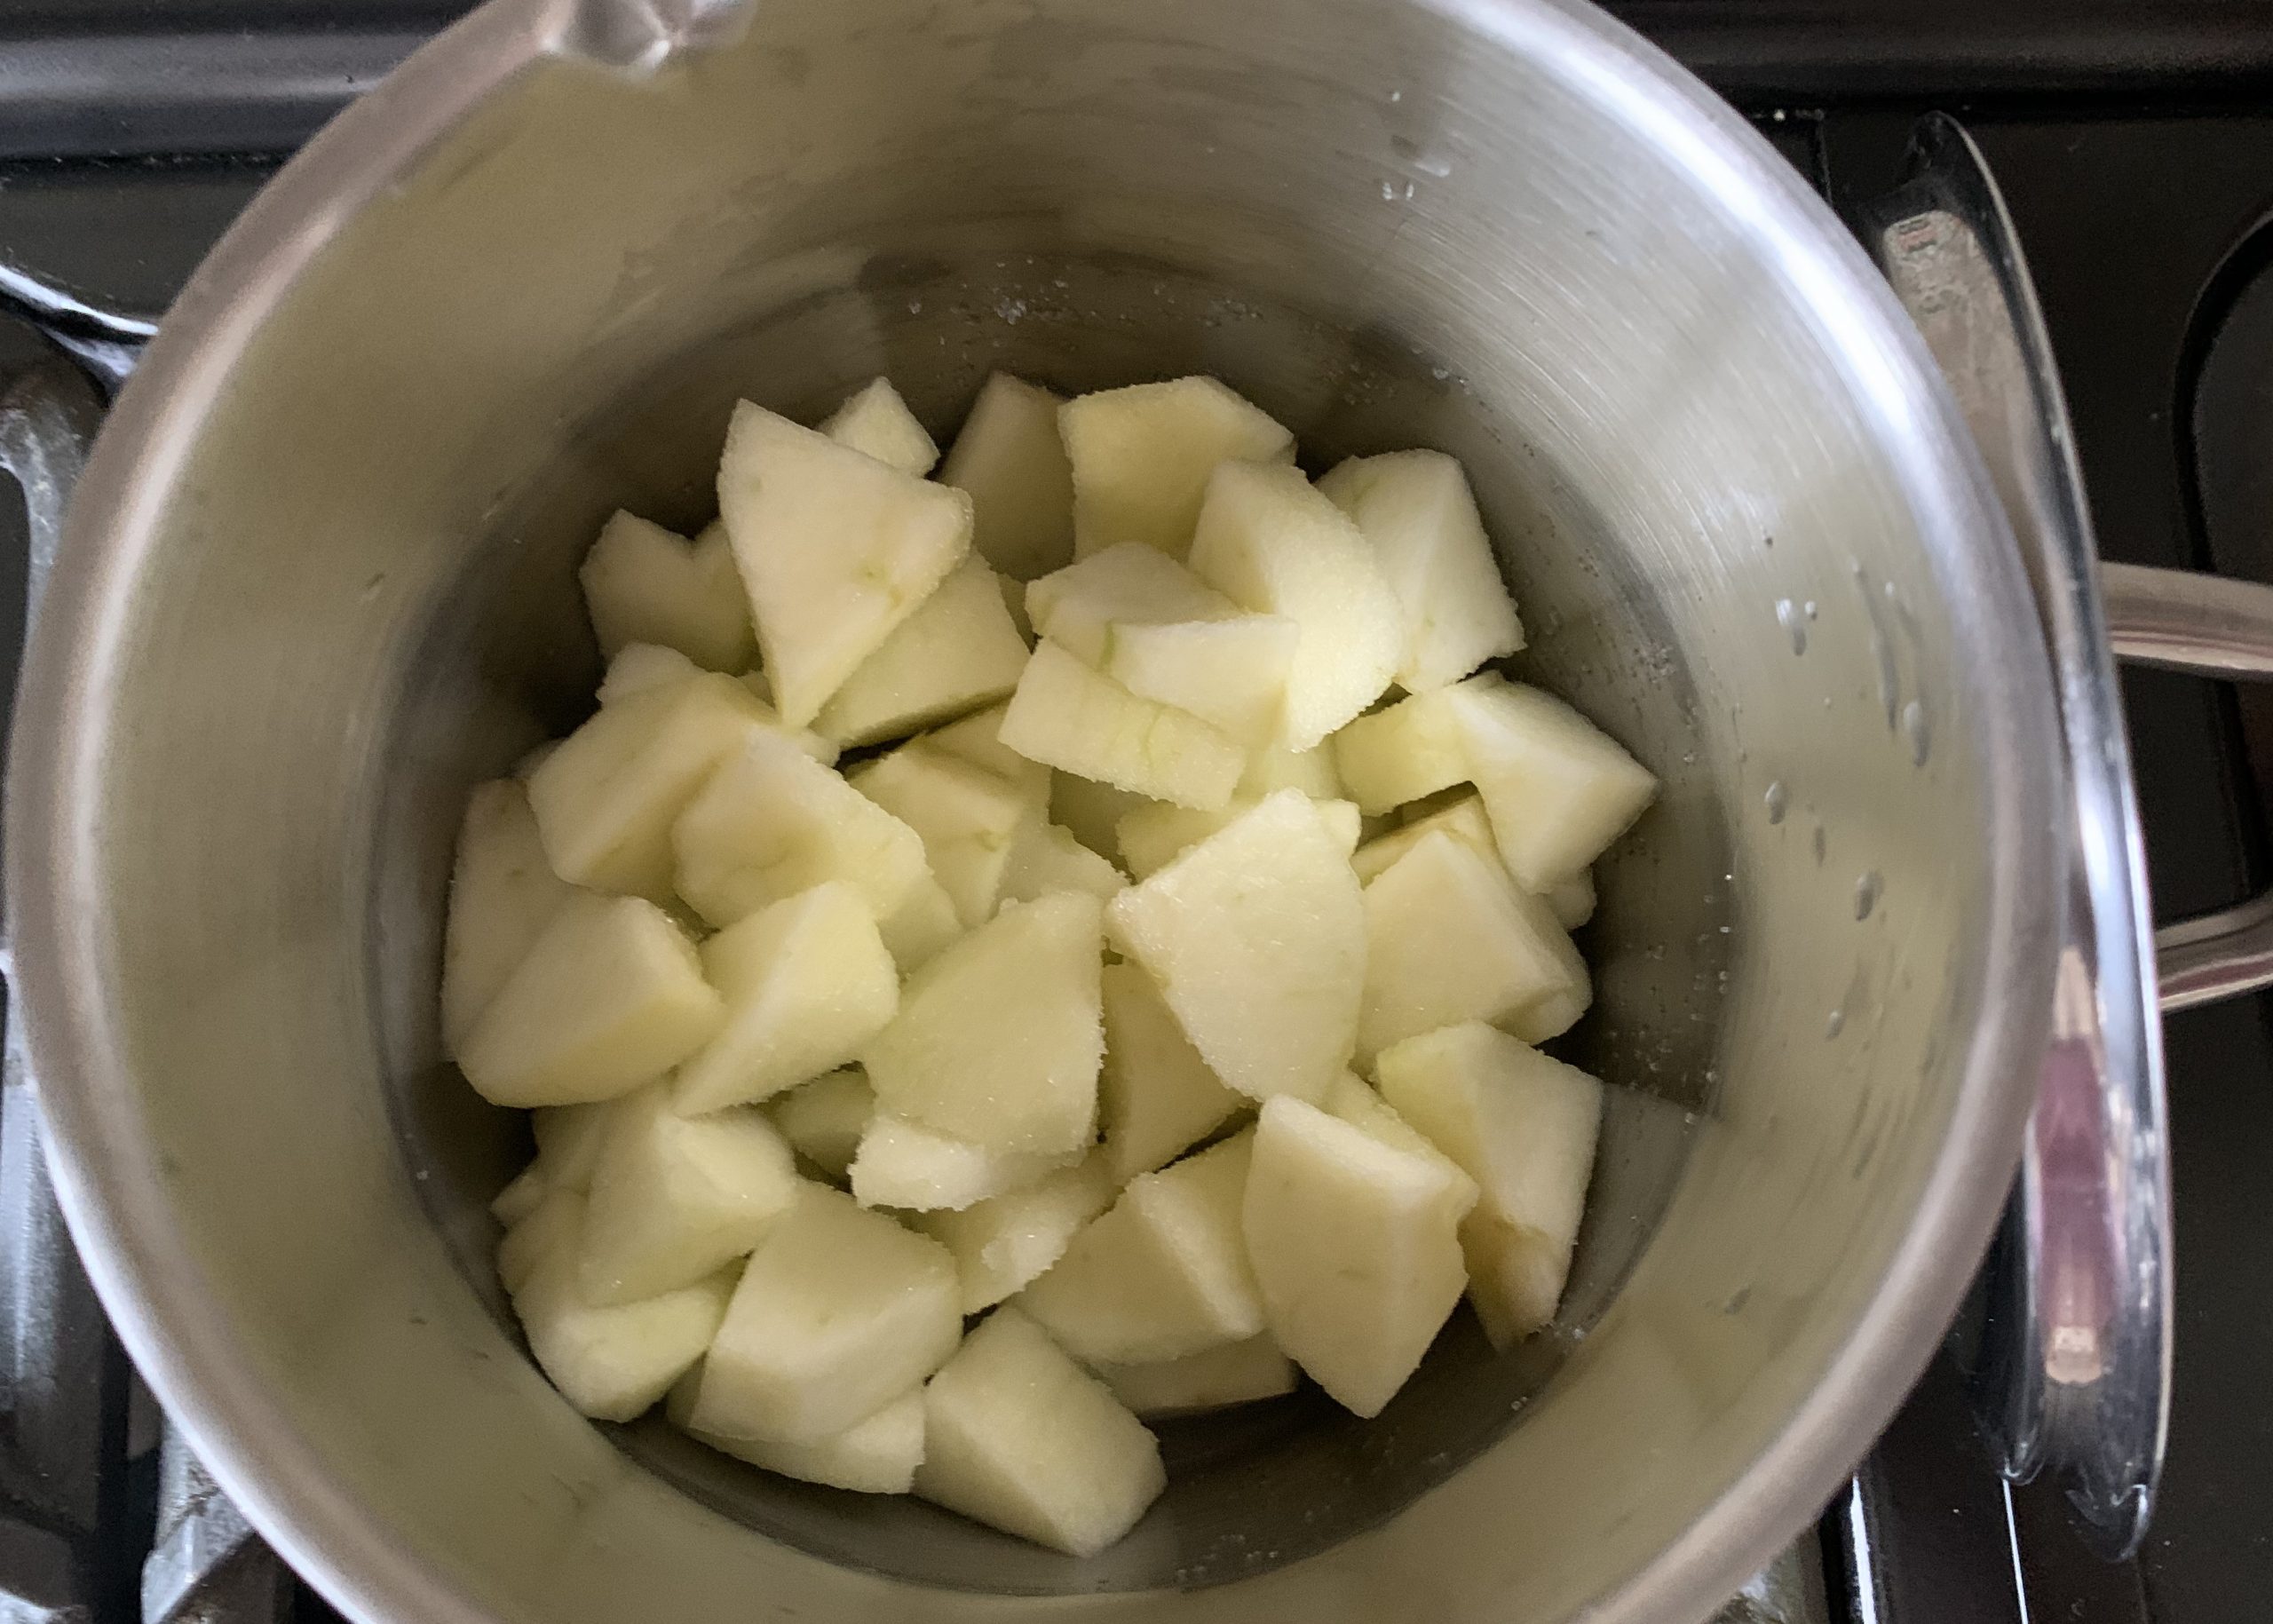 Diced apples for apple turnovers